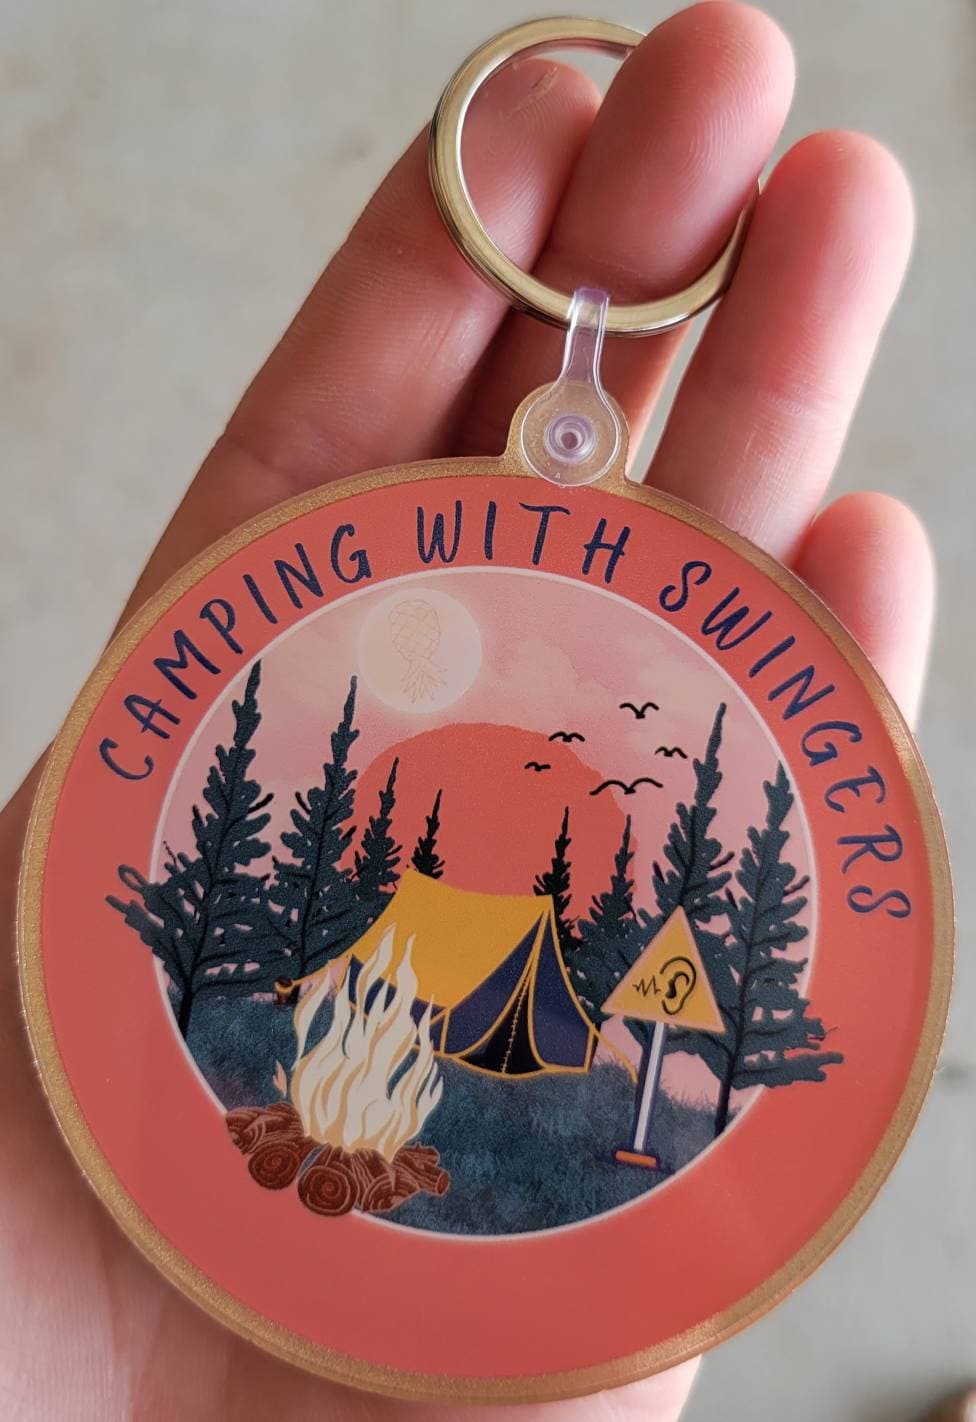 Swingers Camping Keychain / Tent or Camper Decor / Upside Down